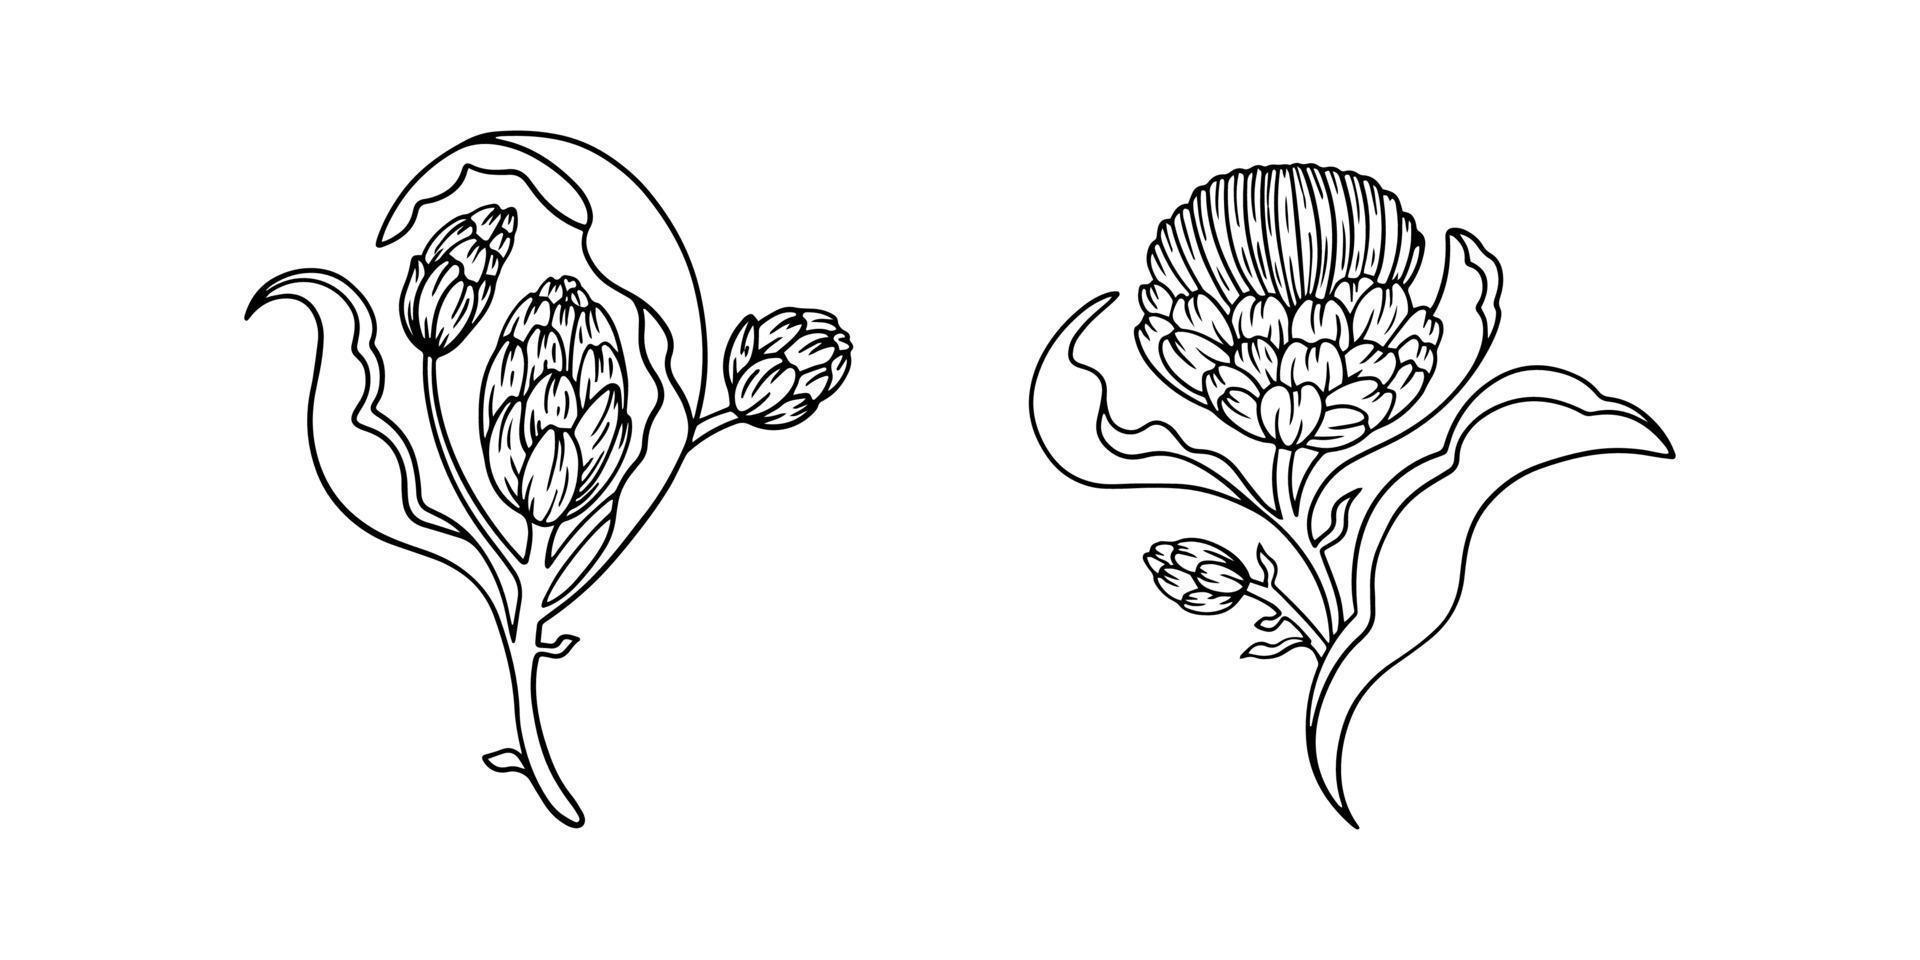 Hand drawn artichoke isolated on white. Vector line art illustration of artichokes with leaves